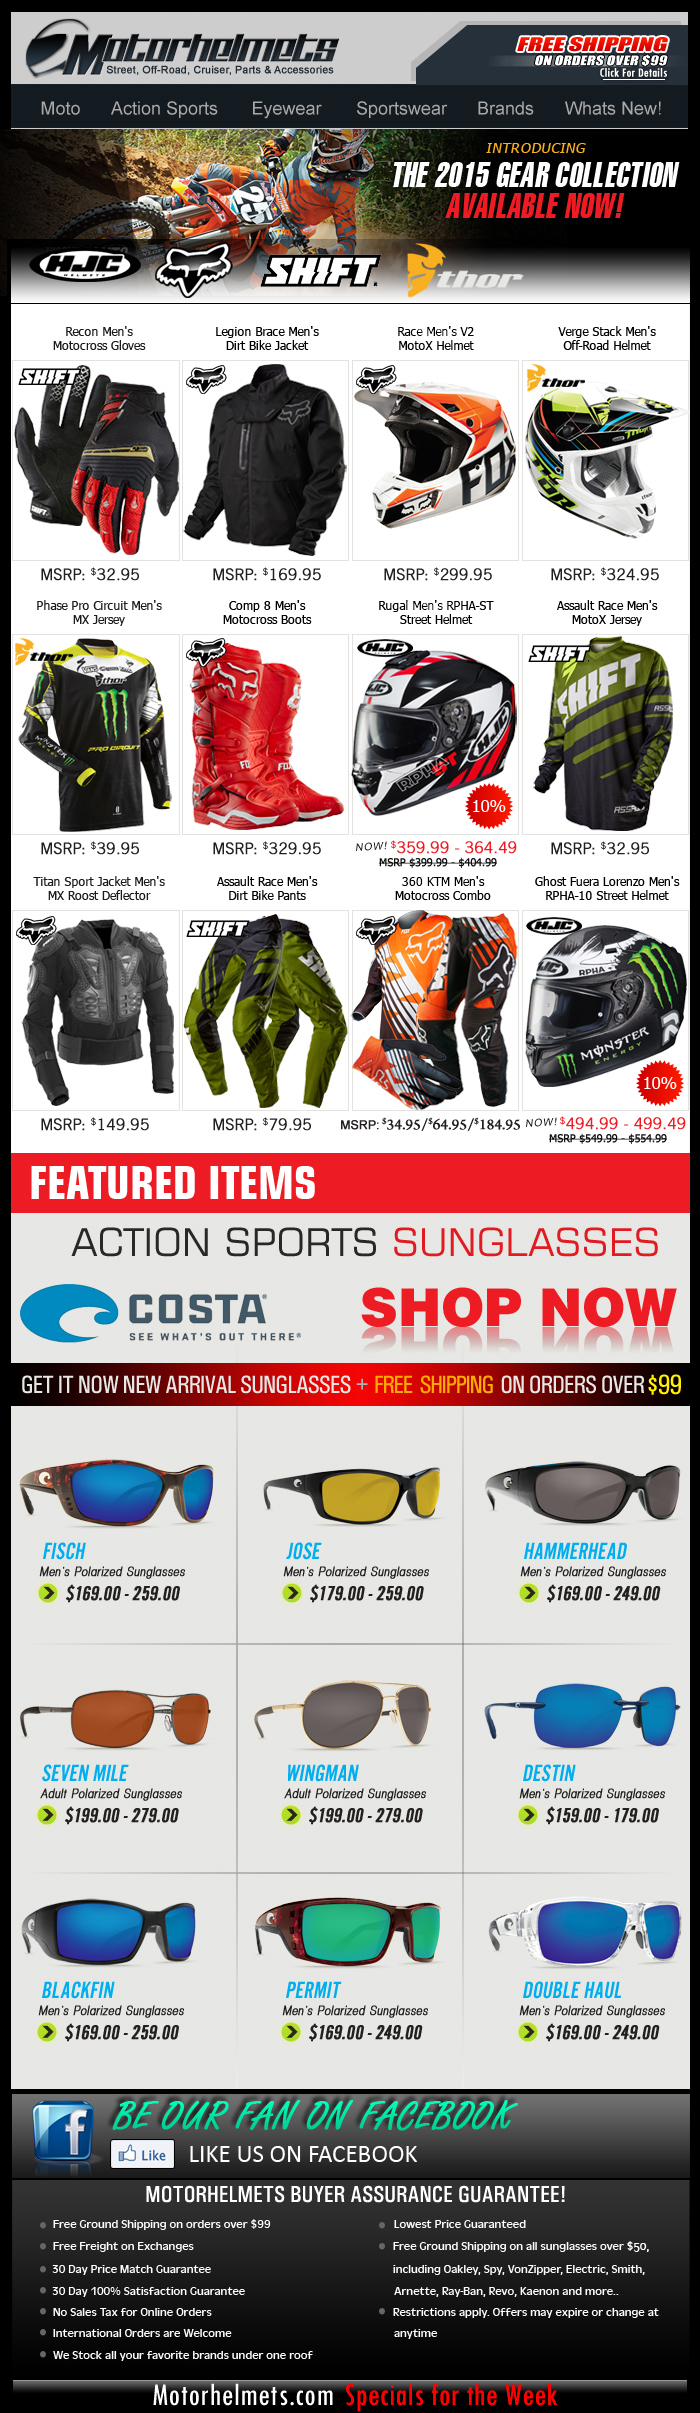 New Gear Specials...2015 Releases from HJC, Thor MX, Fox and more!